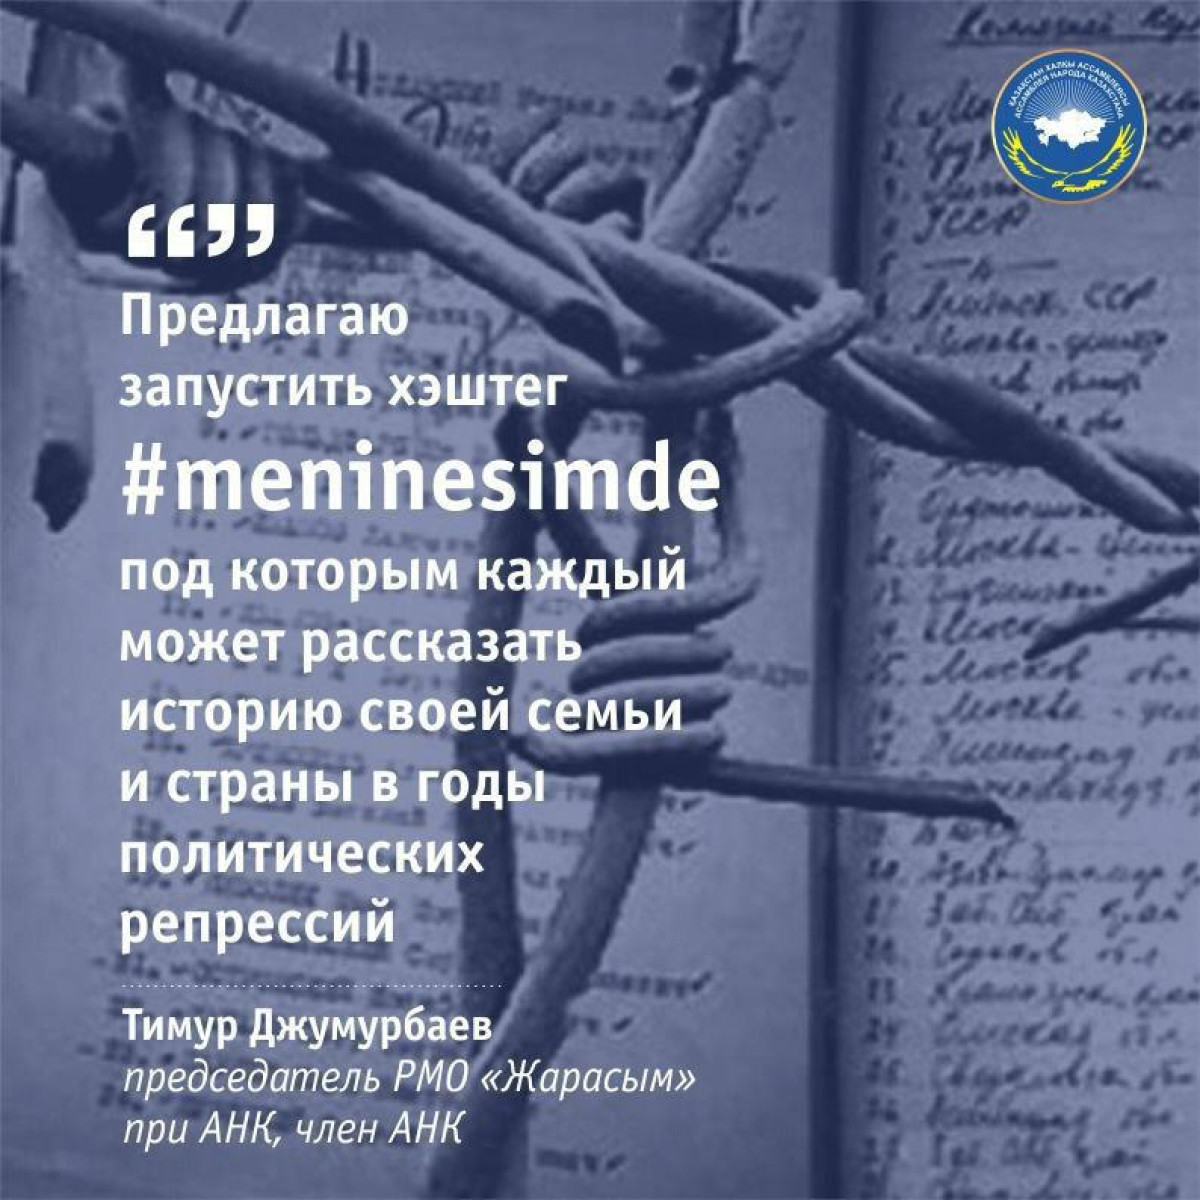 YOUTH OF THE ASSEMBLY OF PEOPLE OF KAZAKHSTAN STARTED HASHTAG #MENINESIMDE